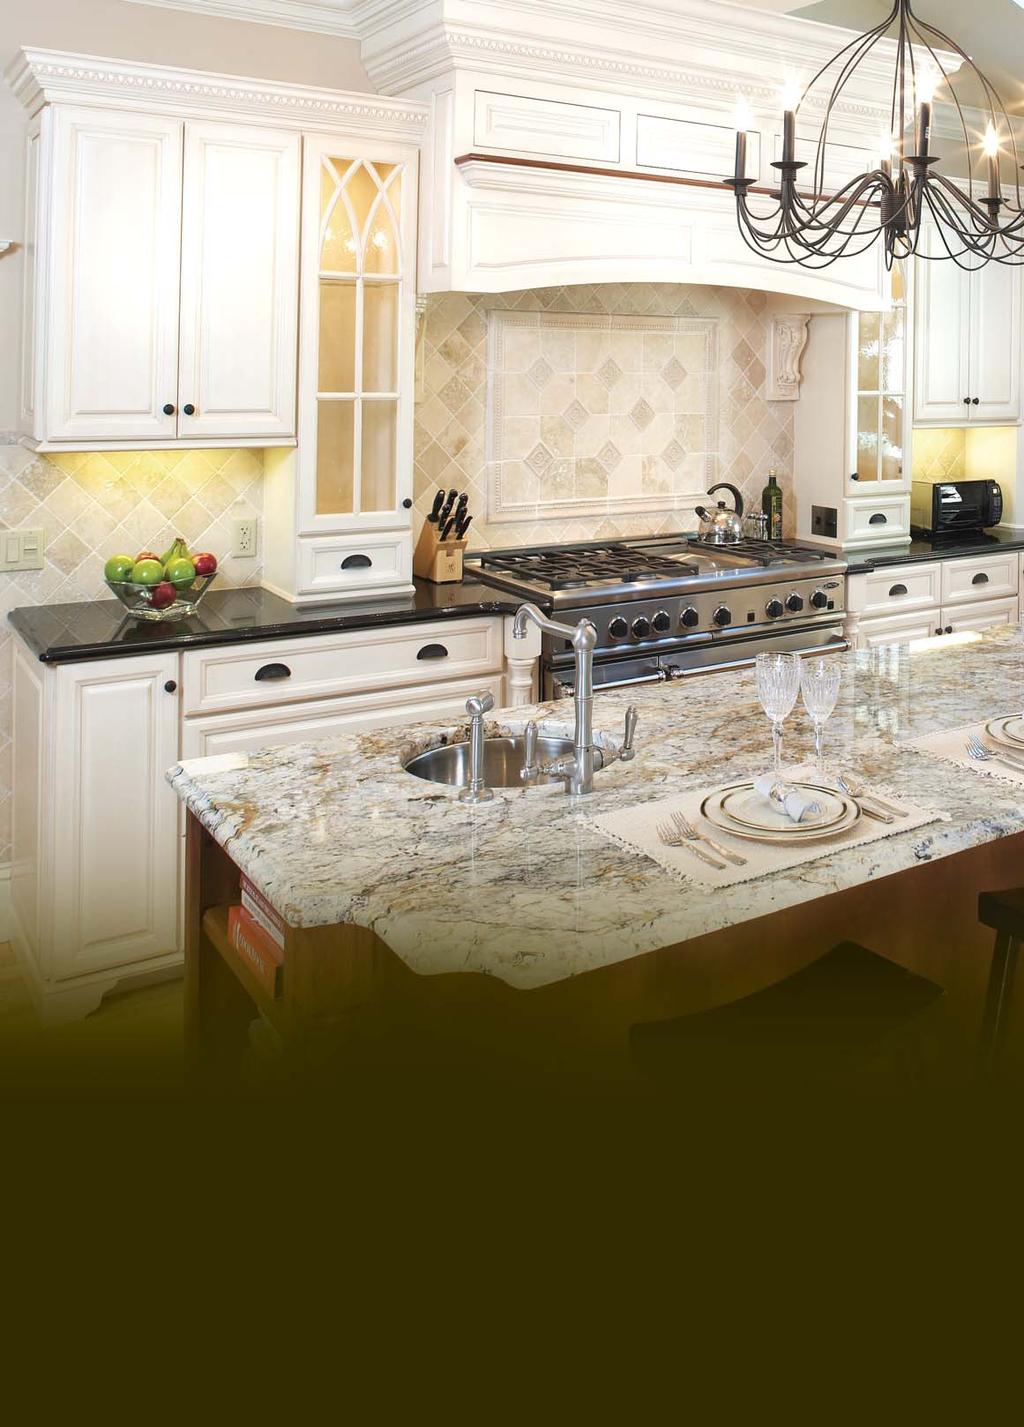 Featured here is an elegant kitchen